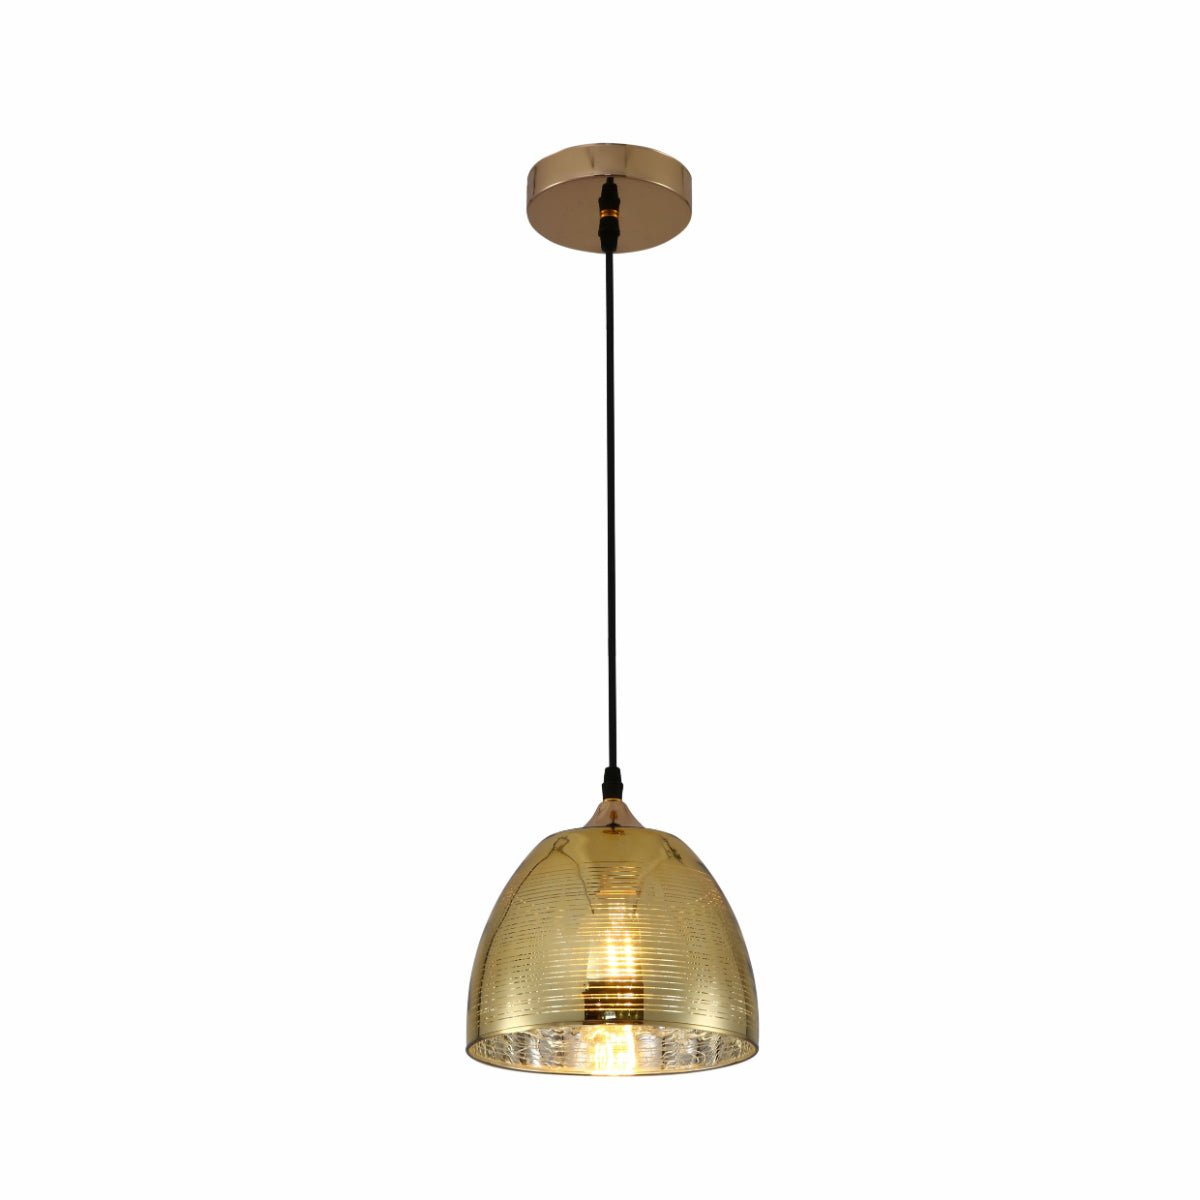 Main image of Gold Glass Dome Pendant Ceiling Light with E27 Fitting | TEKLED 150-18013